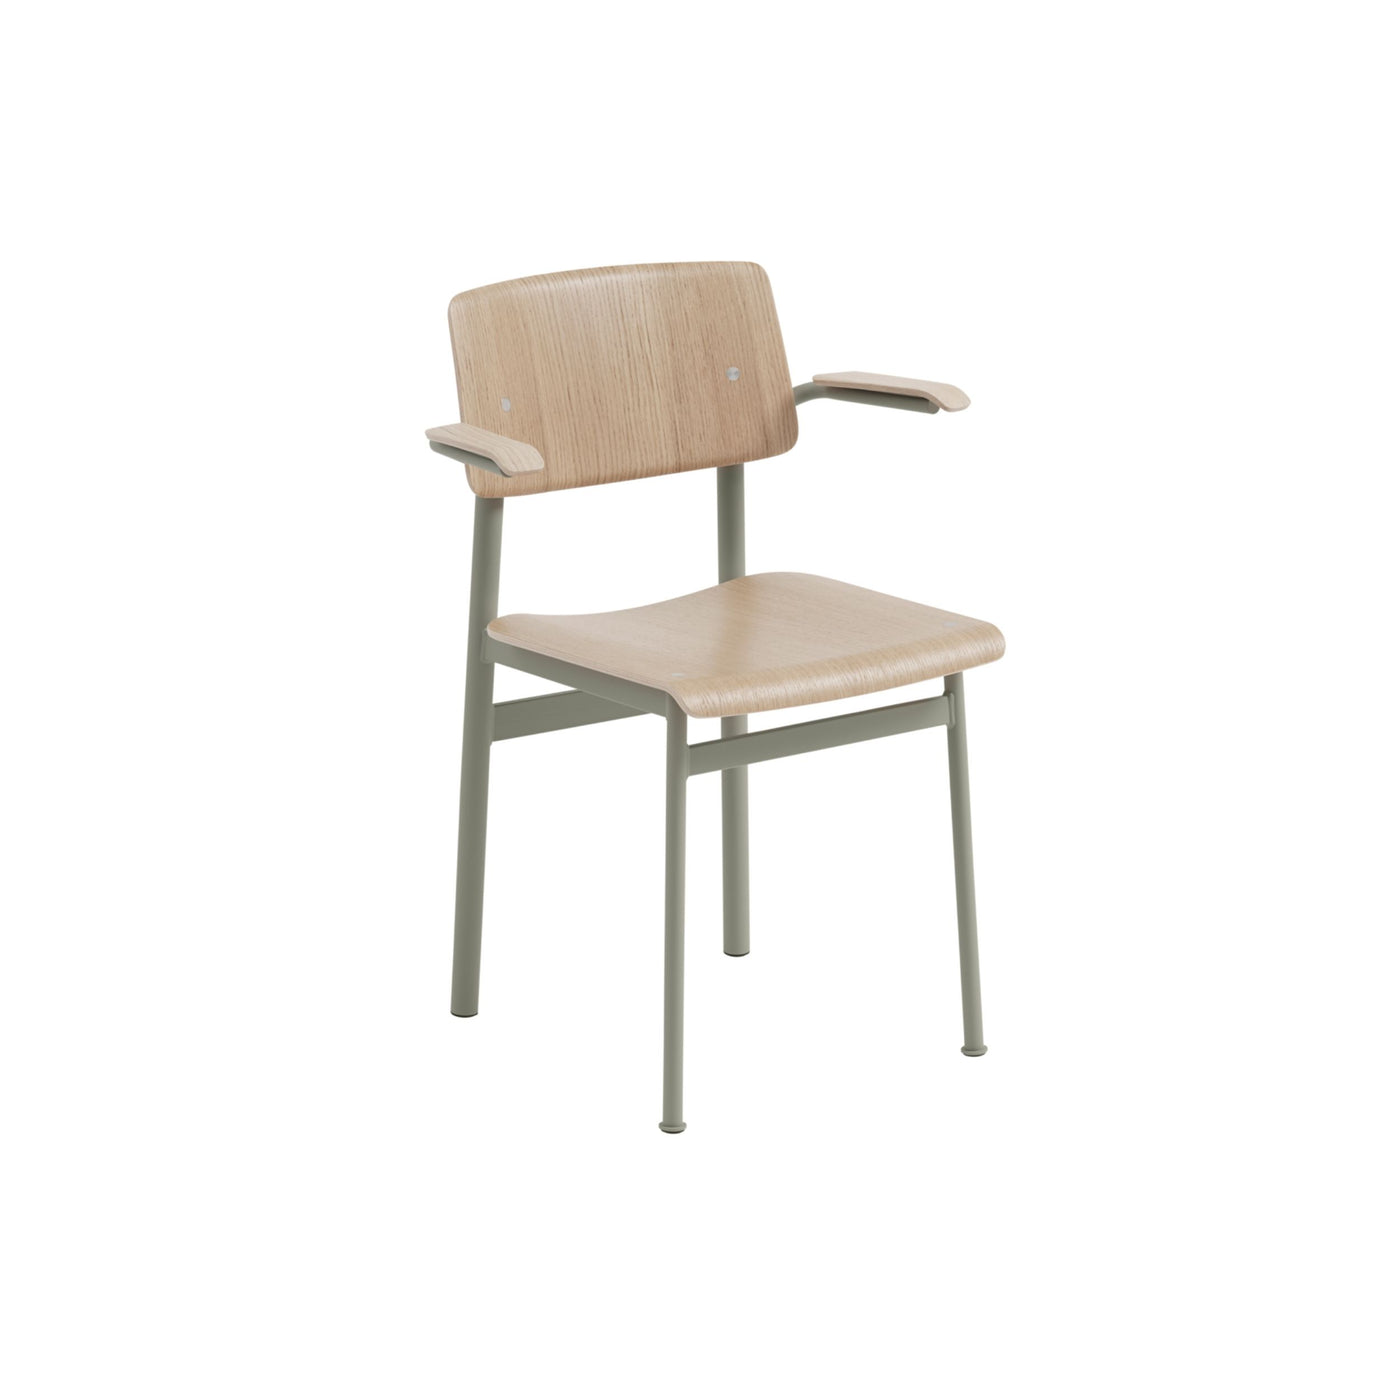 Muuto Loft Chair with armrest. Shop online at someday designs. #colour_oak-dusty-green